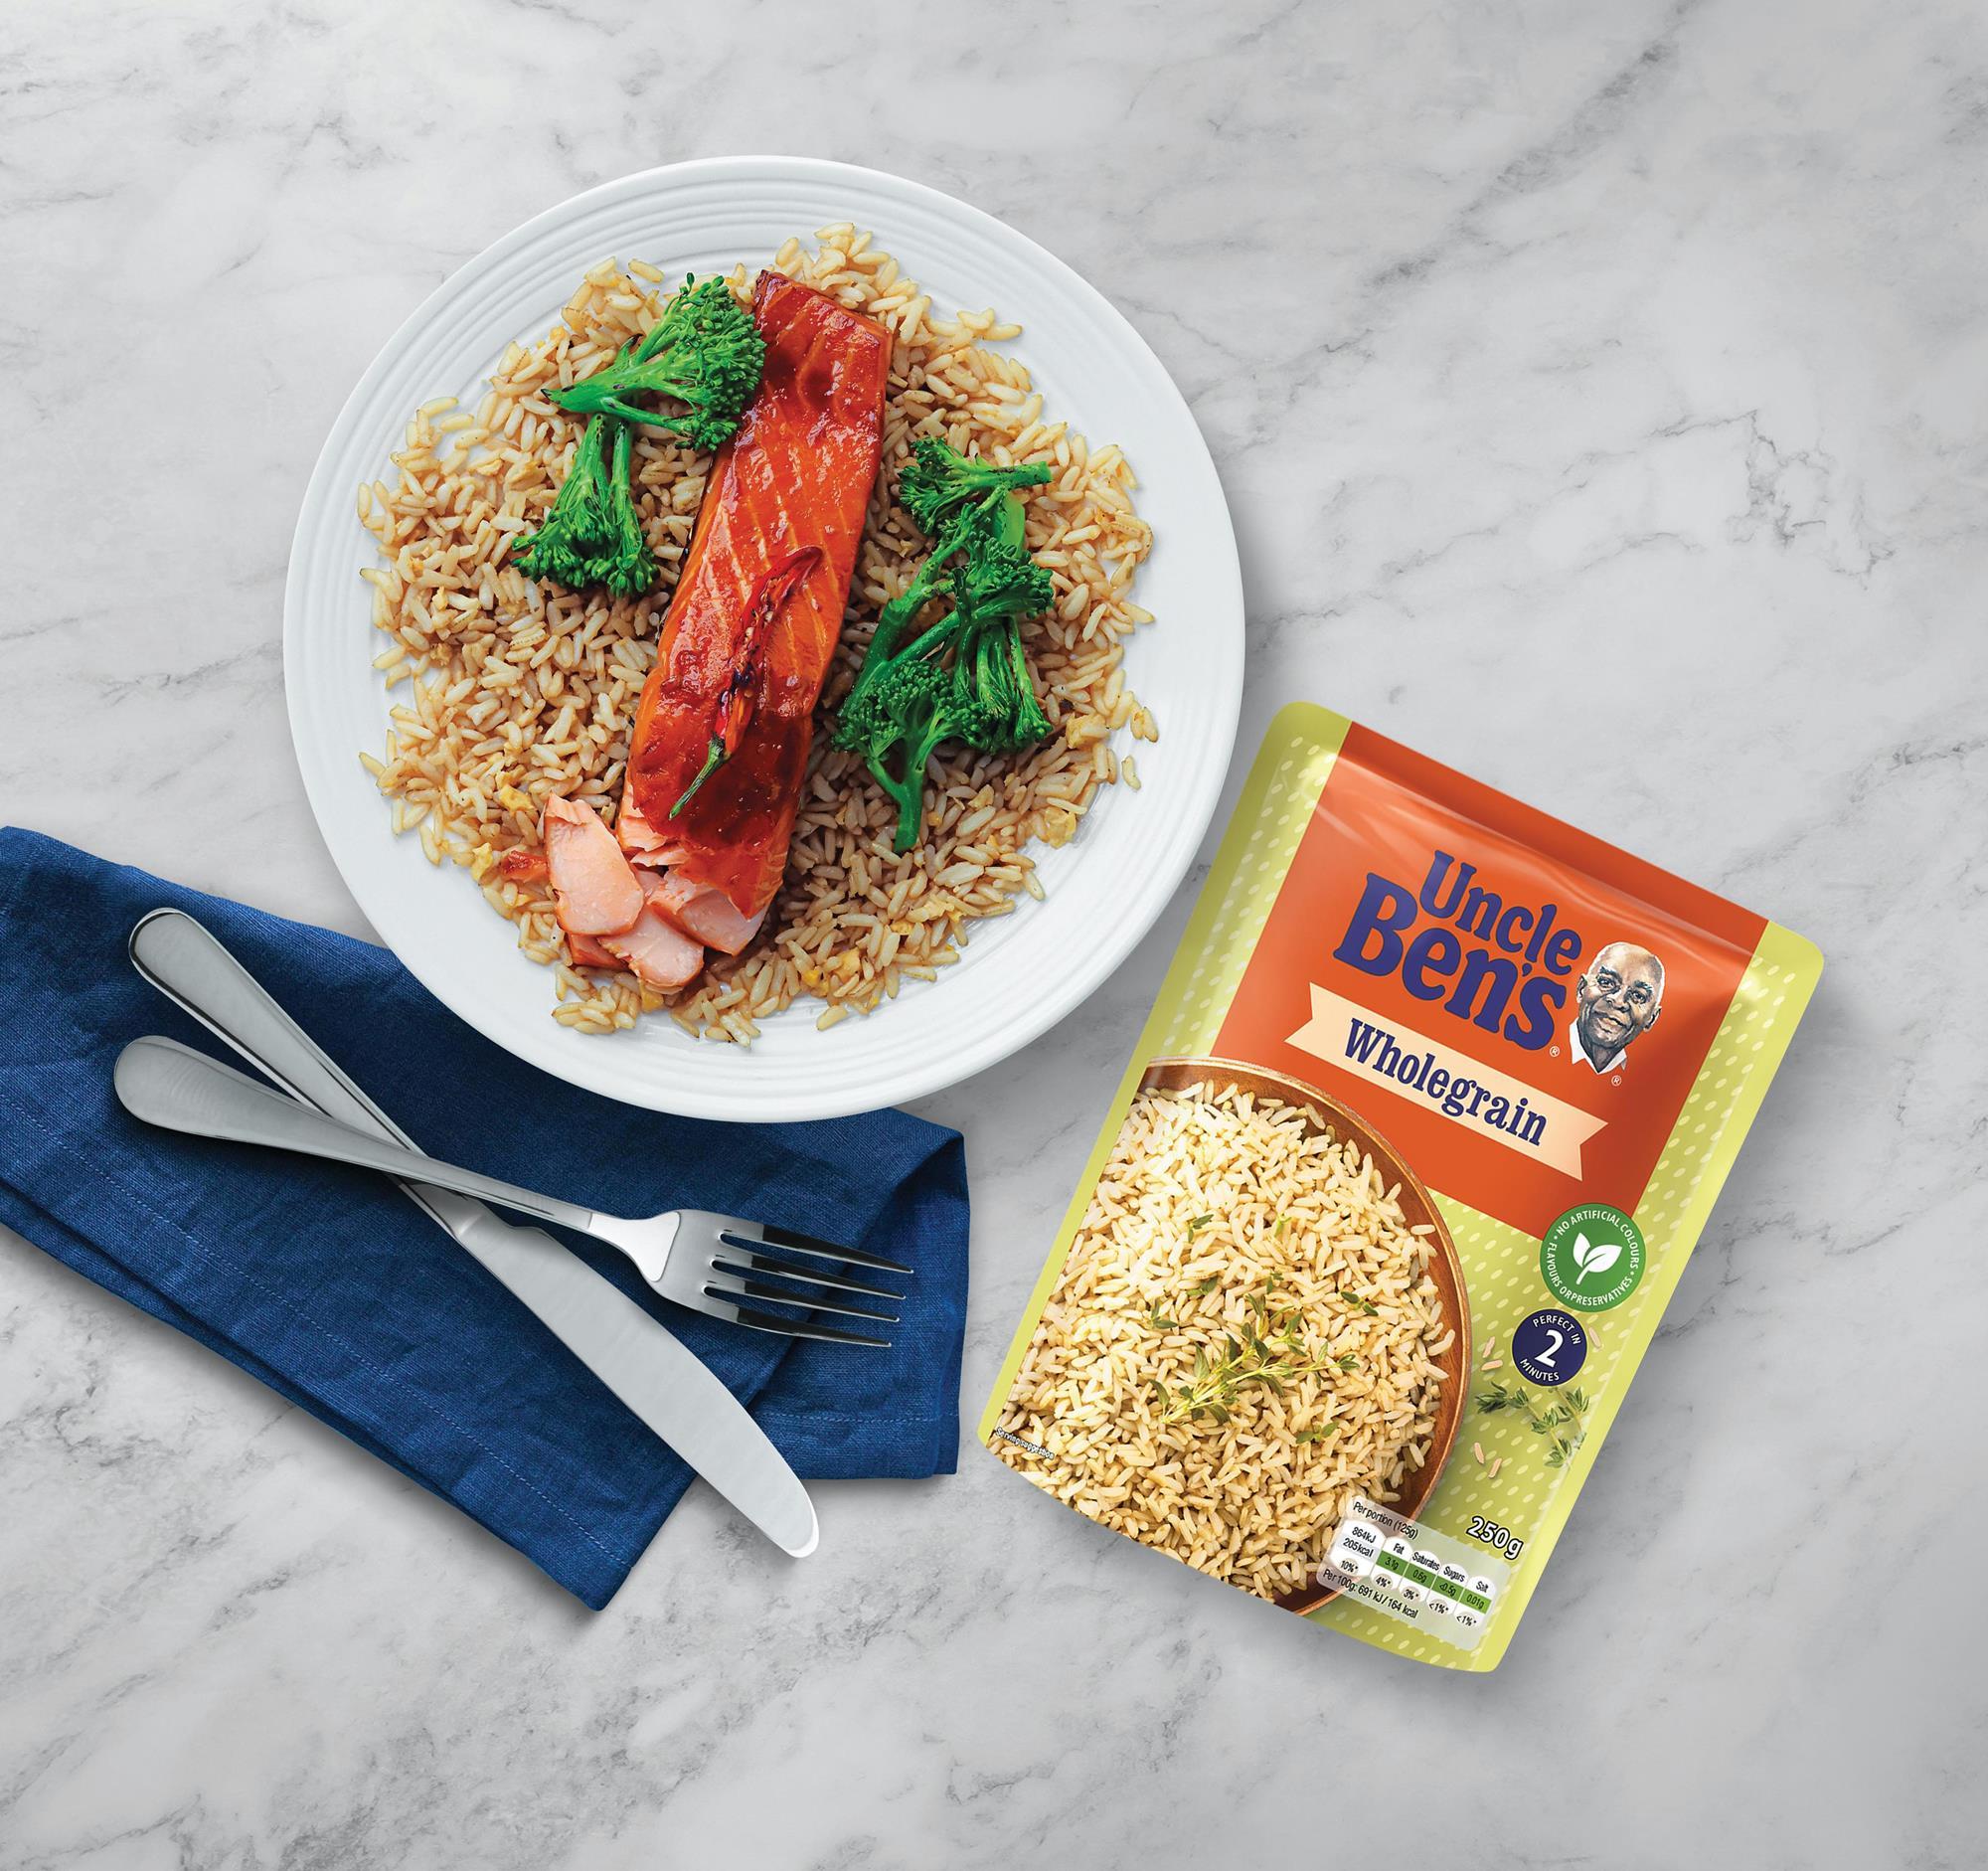 SunRices new microwavable pouch improves rice quality